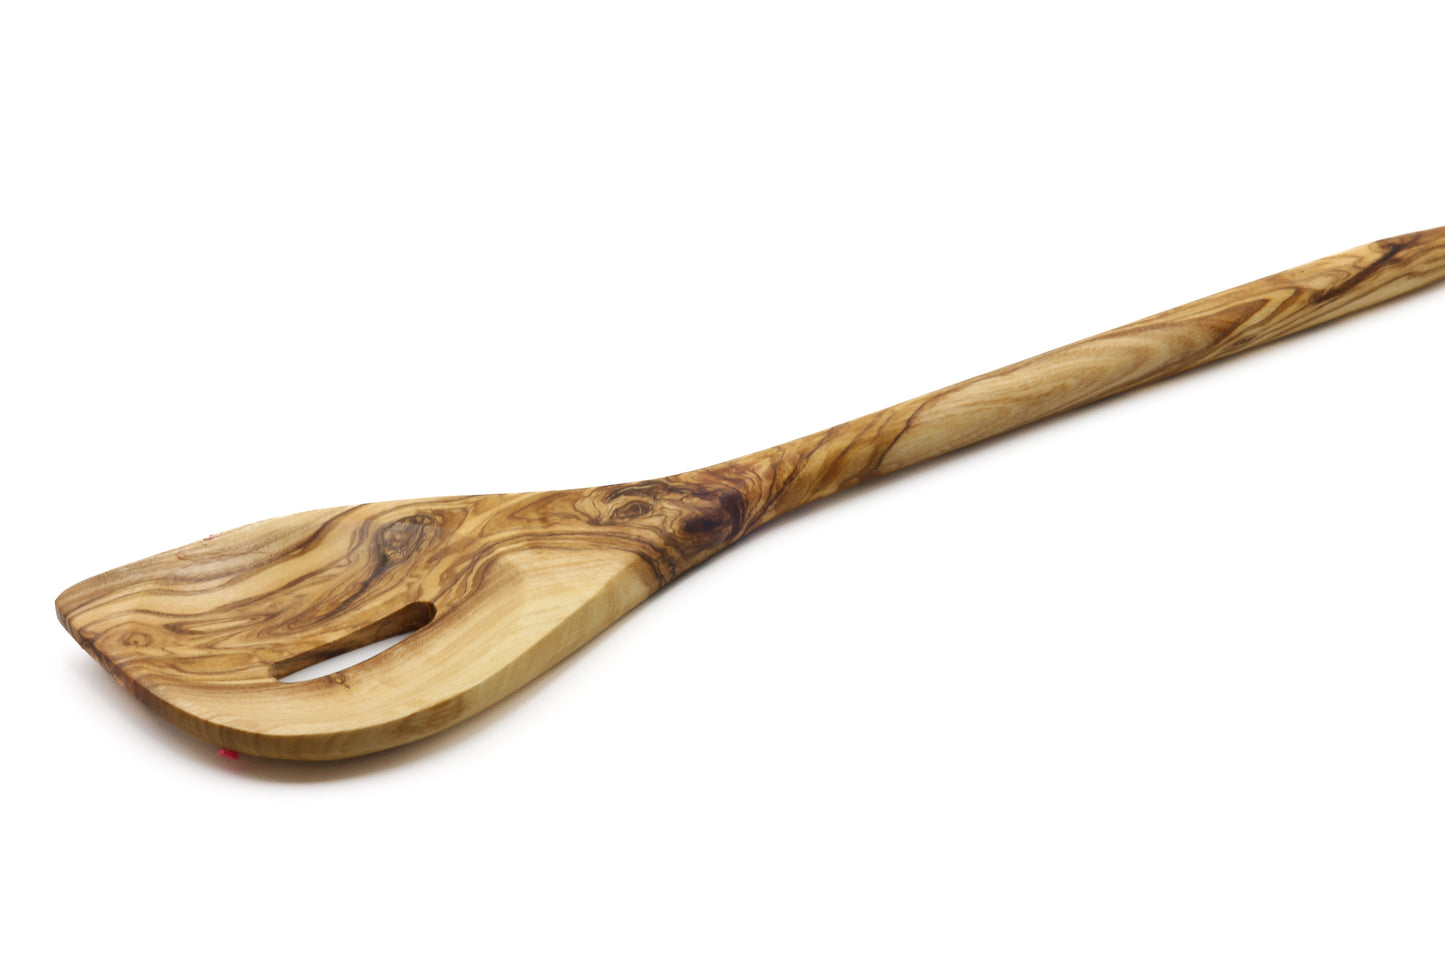 Pointed olive wood utensil for stirring and mixing, featuring a central hole